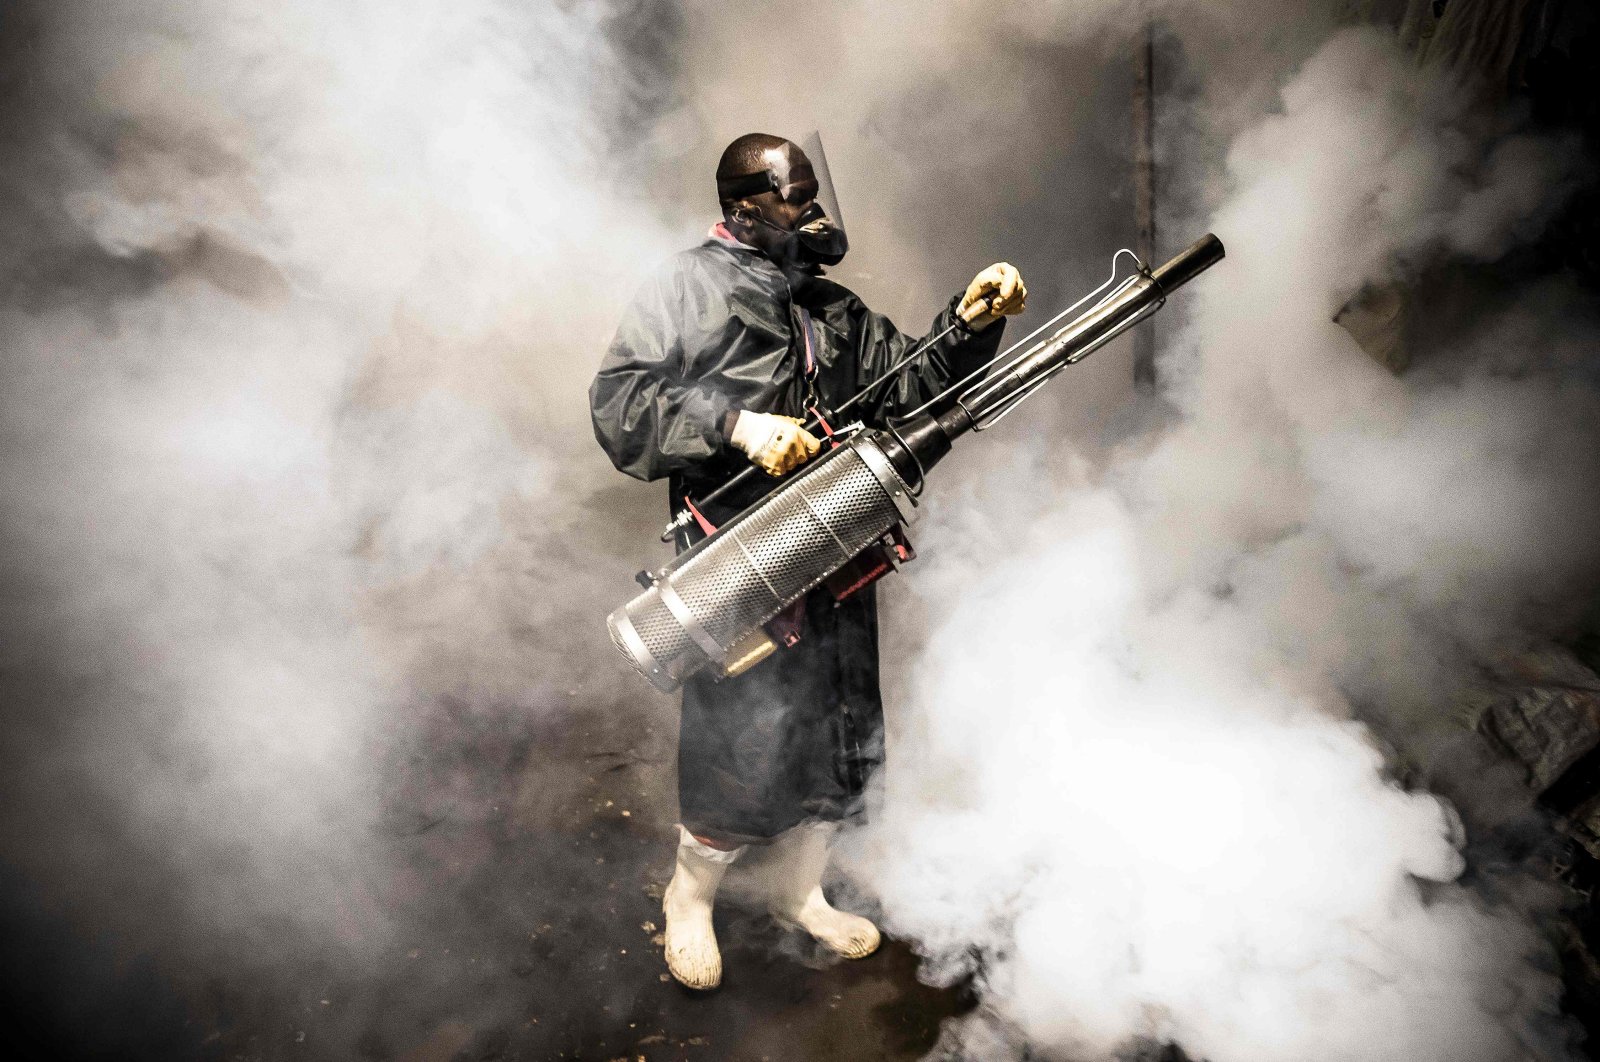 A member of a privately funded nongovernmental organization fumigates and disinfects streets and the stalls at Parklands City Park Market to help curb the spread of COVID-19, Nairobi, Kenya, April 15, 2020. (AFP Photo)